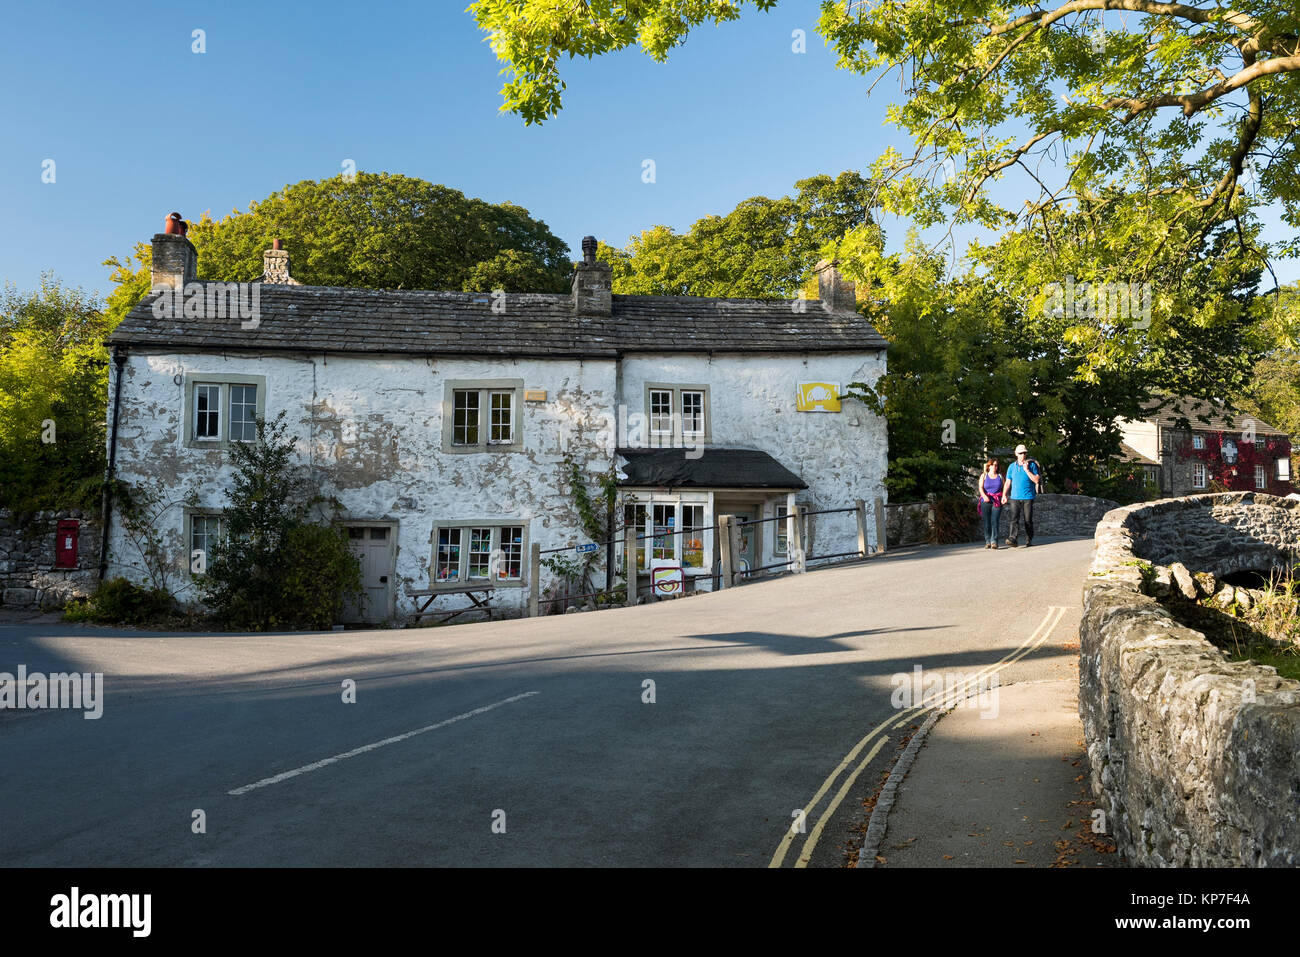 On sunny day, couple are walking across stone bridge in Malham centre,  by old village shop with peeling white paint - Yorkshire Dales, England, UK. Stock Photo